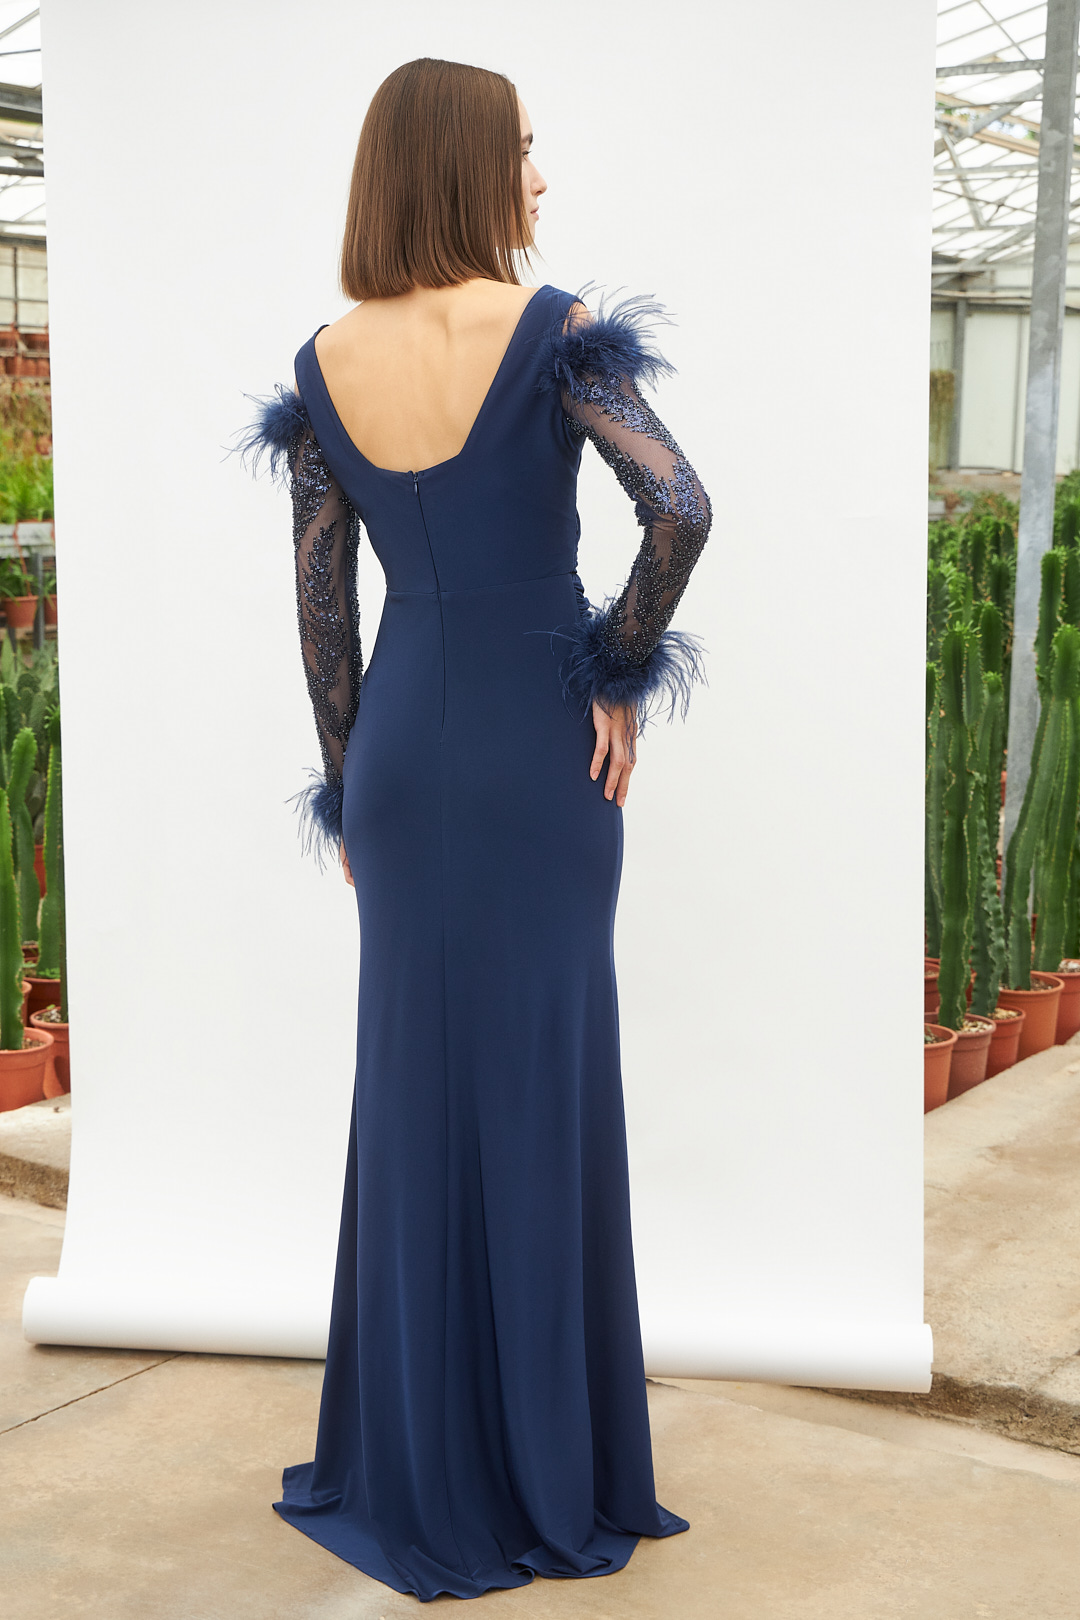 Classic Dresses / Long classic dress with long beaded sleeves and feathers on the sleeves